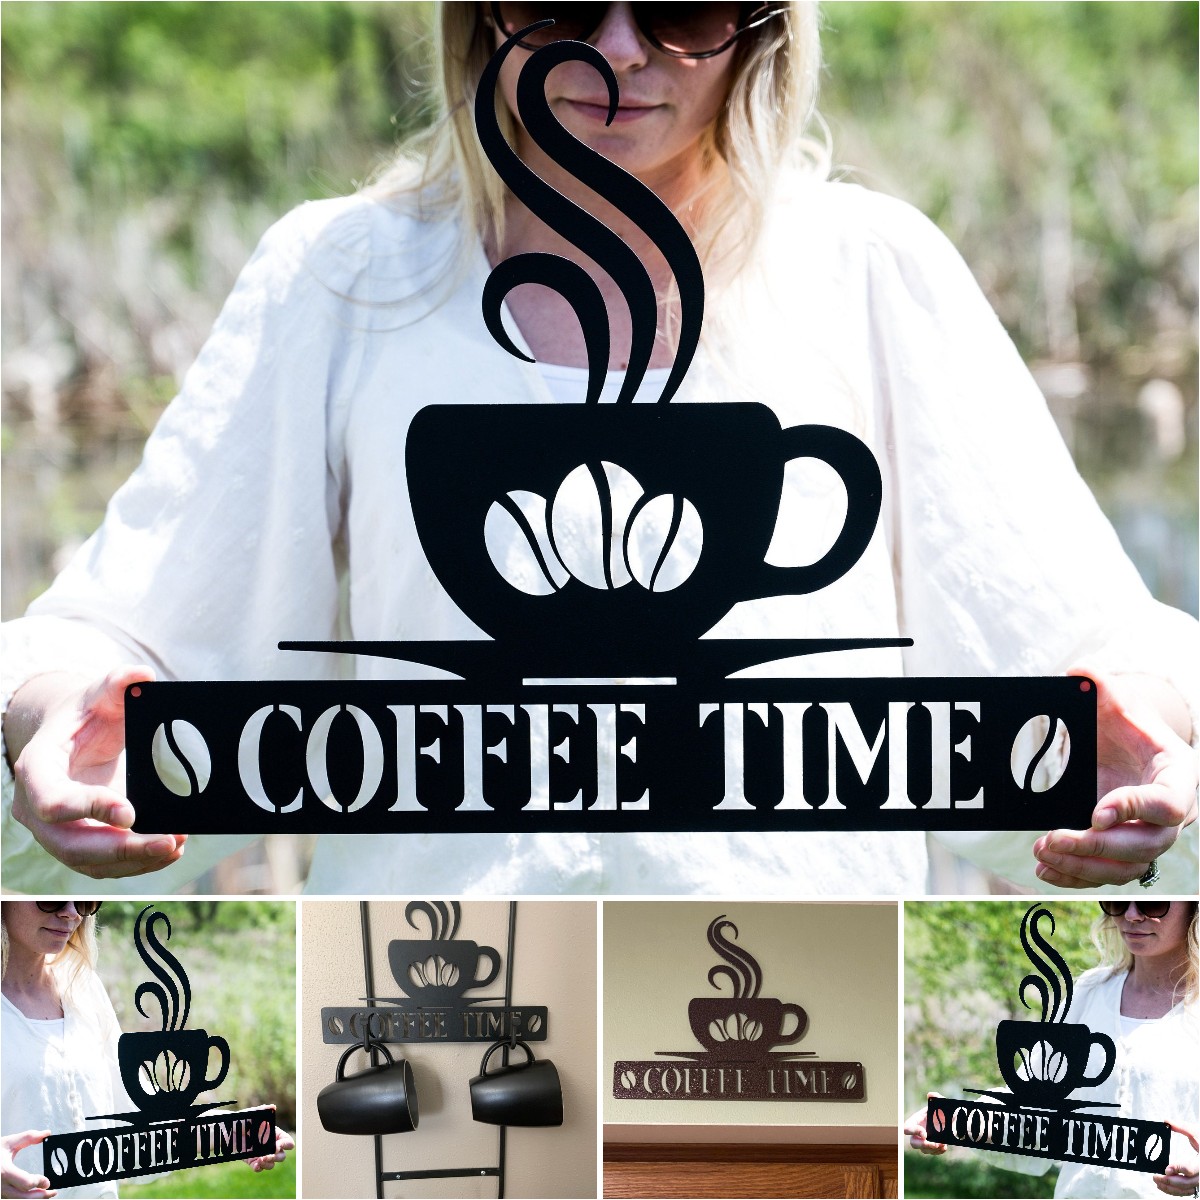 Personalized metal coffee sign